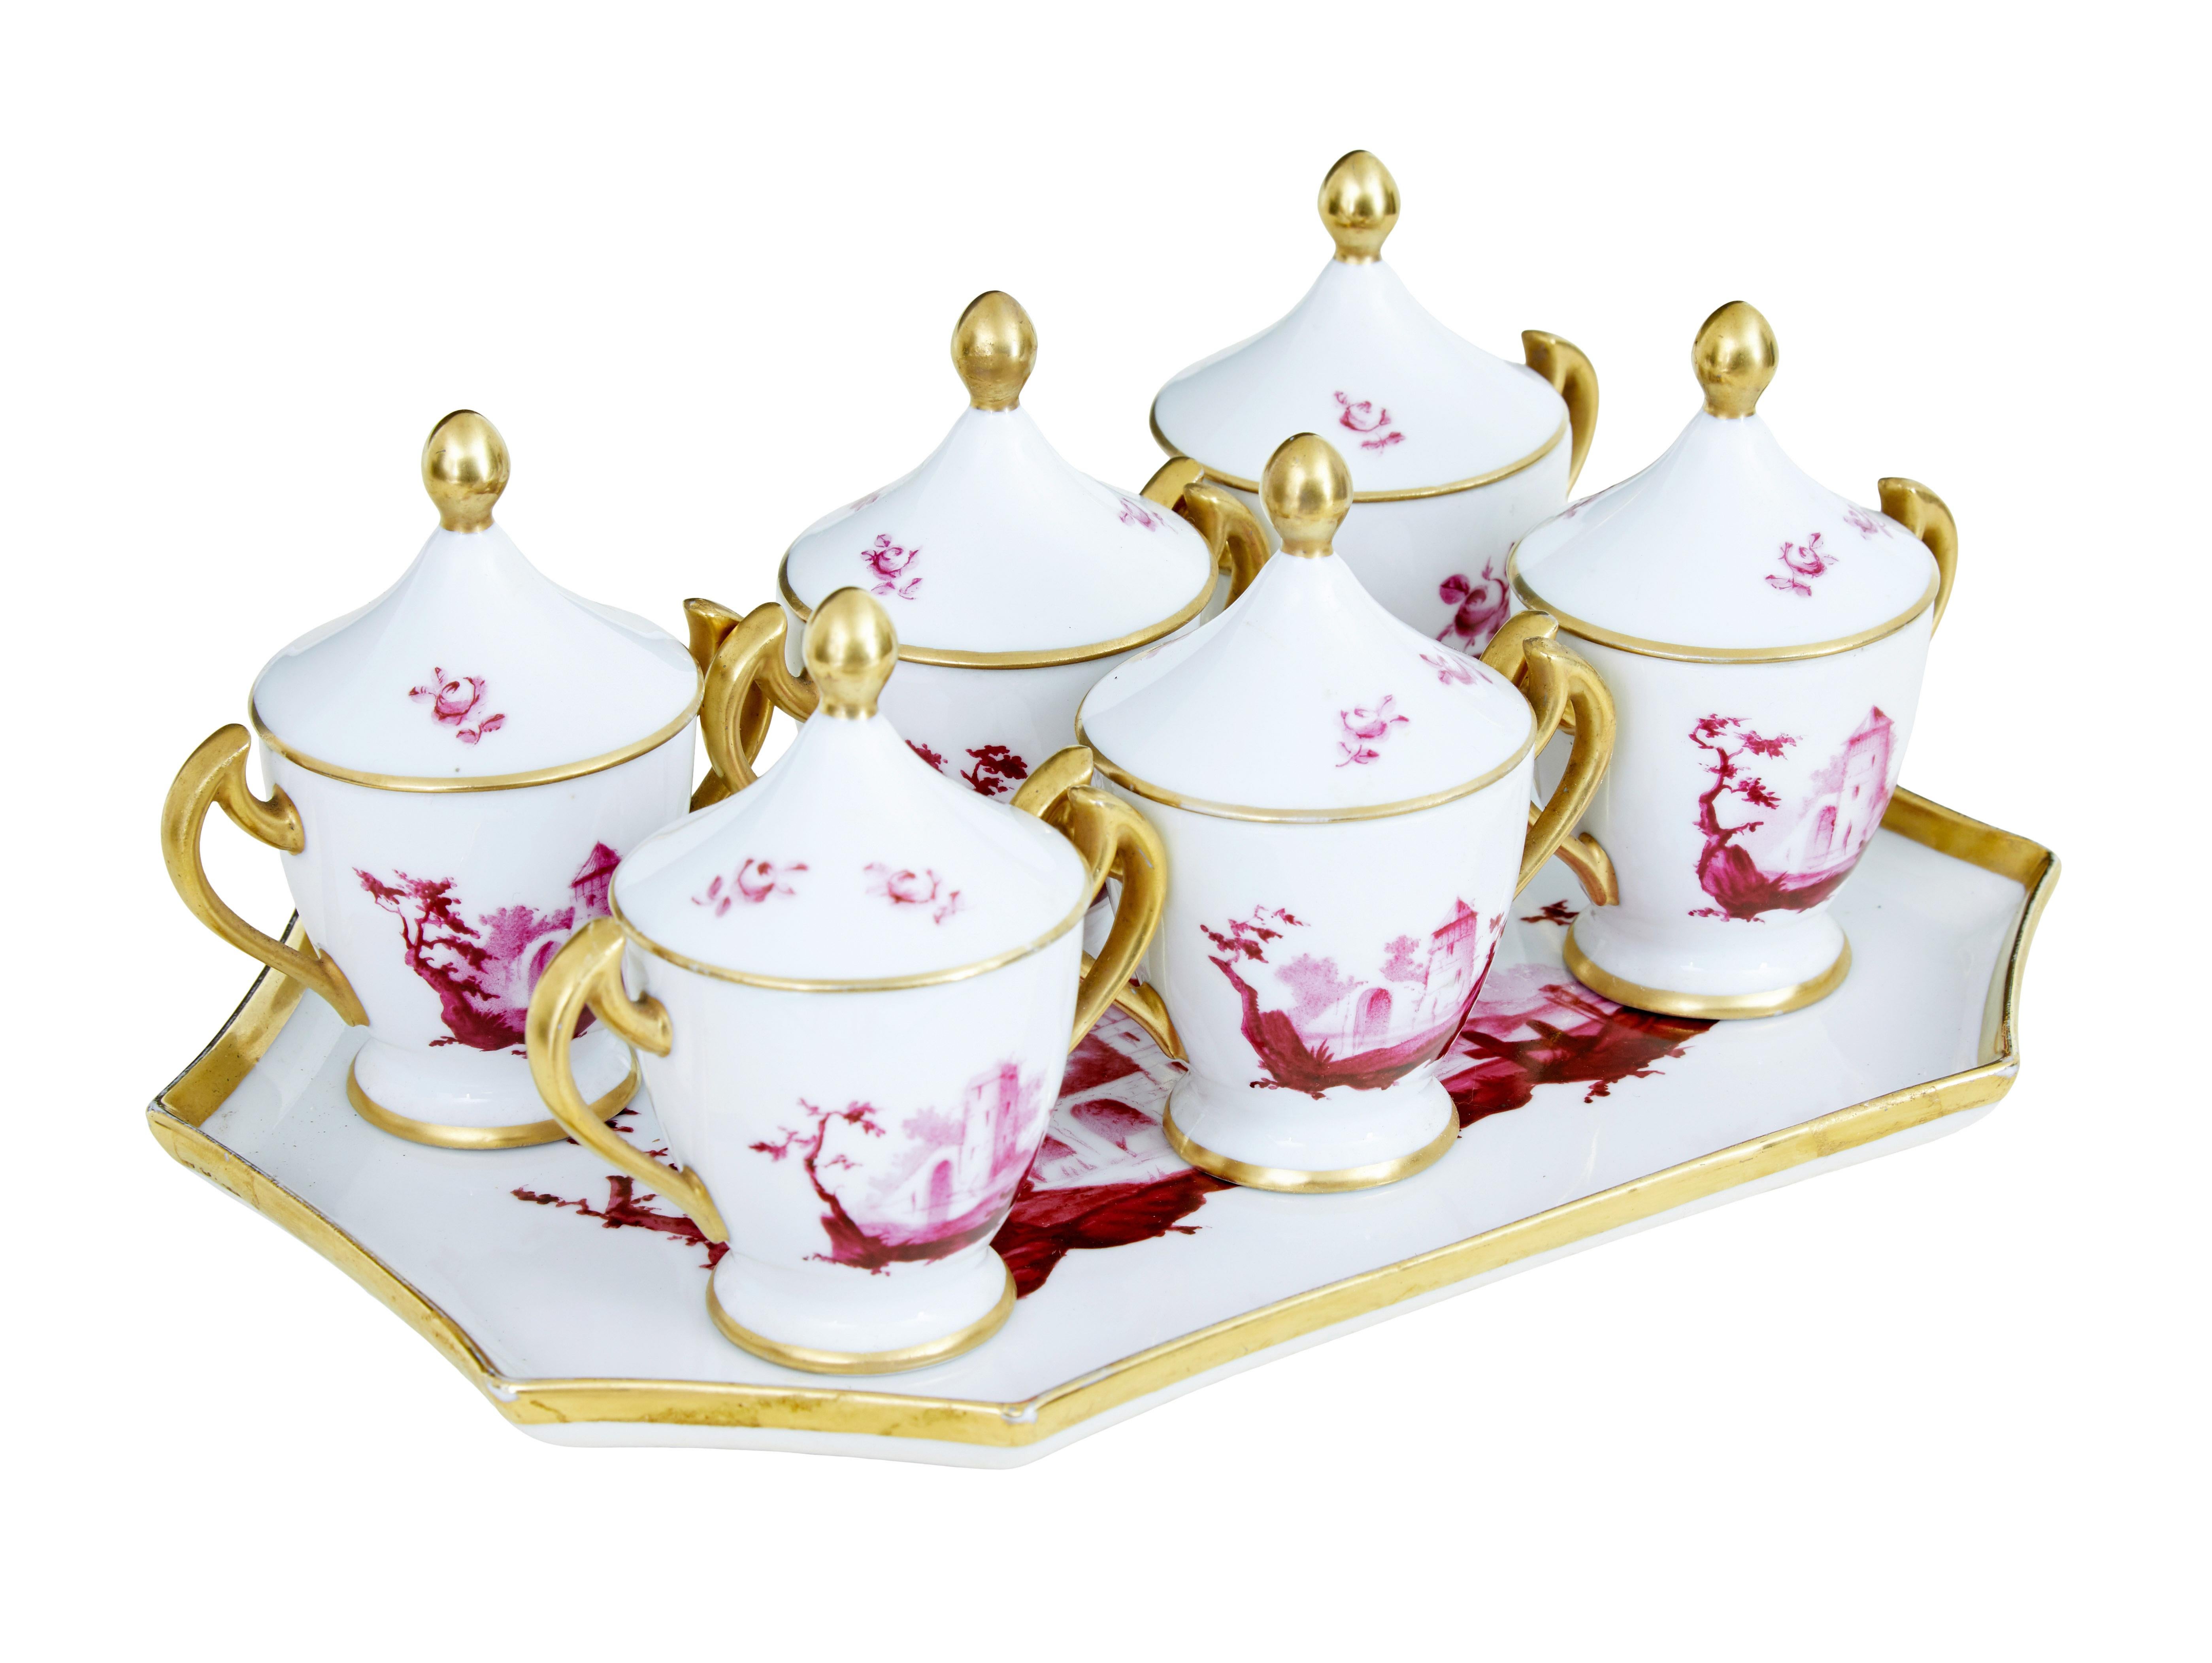 20th century French porcelain 7 piece dessert set, circa 1920.

Here we have what we believe to be a french porcelain dessert set. Decorated with gilt handles and lids, set consists of 6 small dessert cups with lids standing on matching plate.